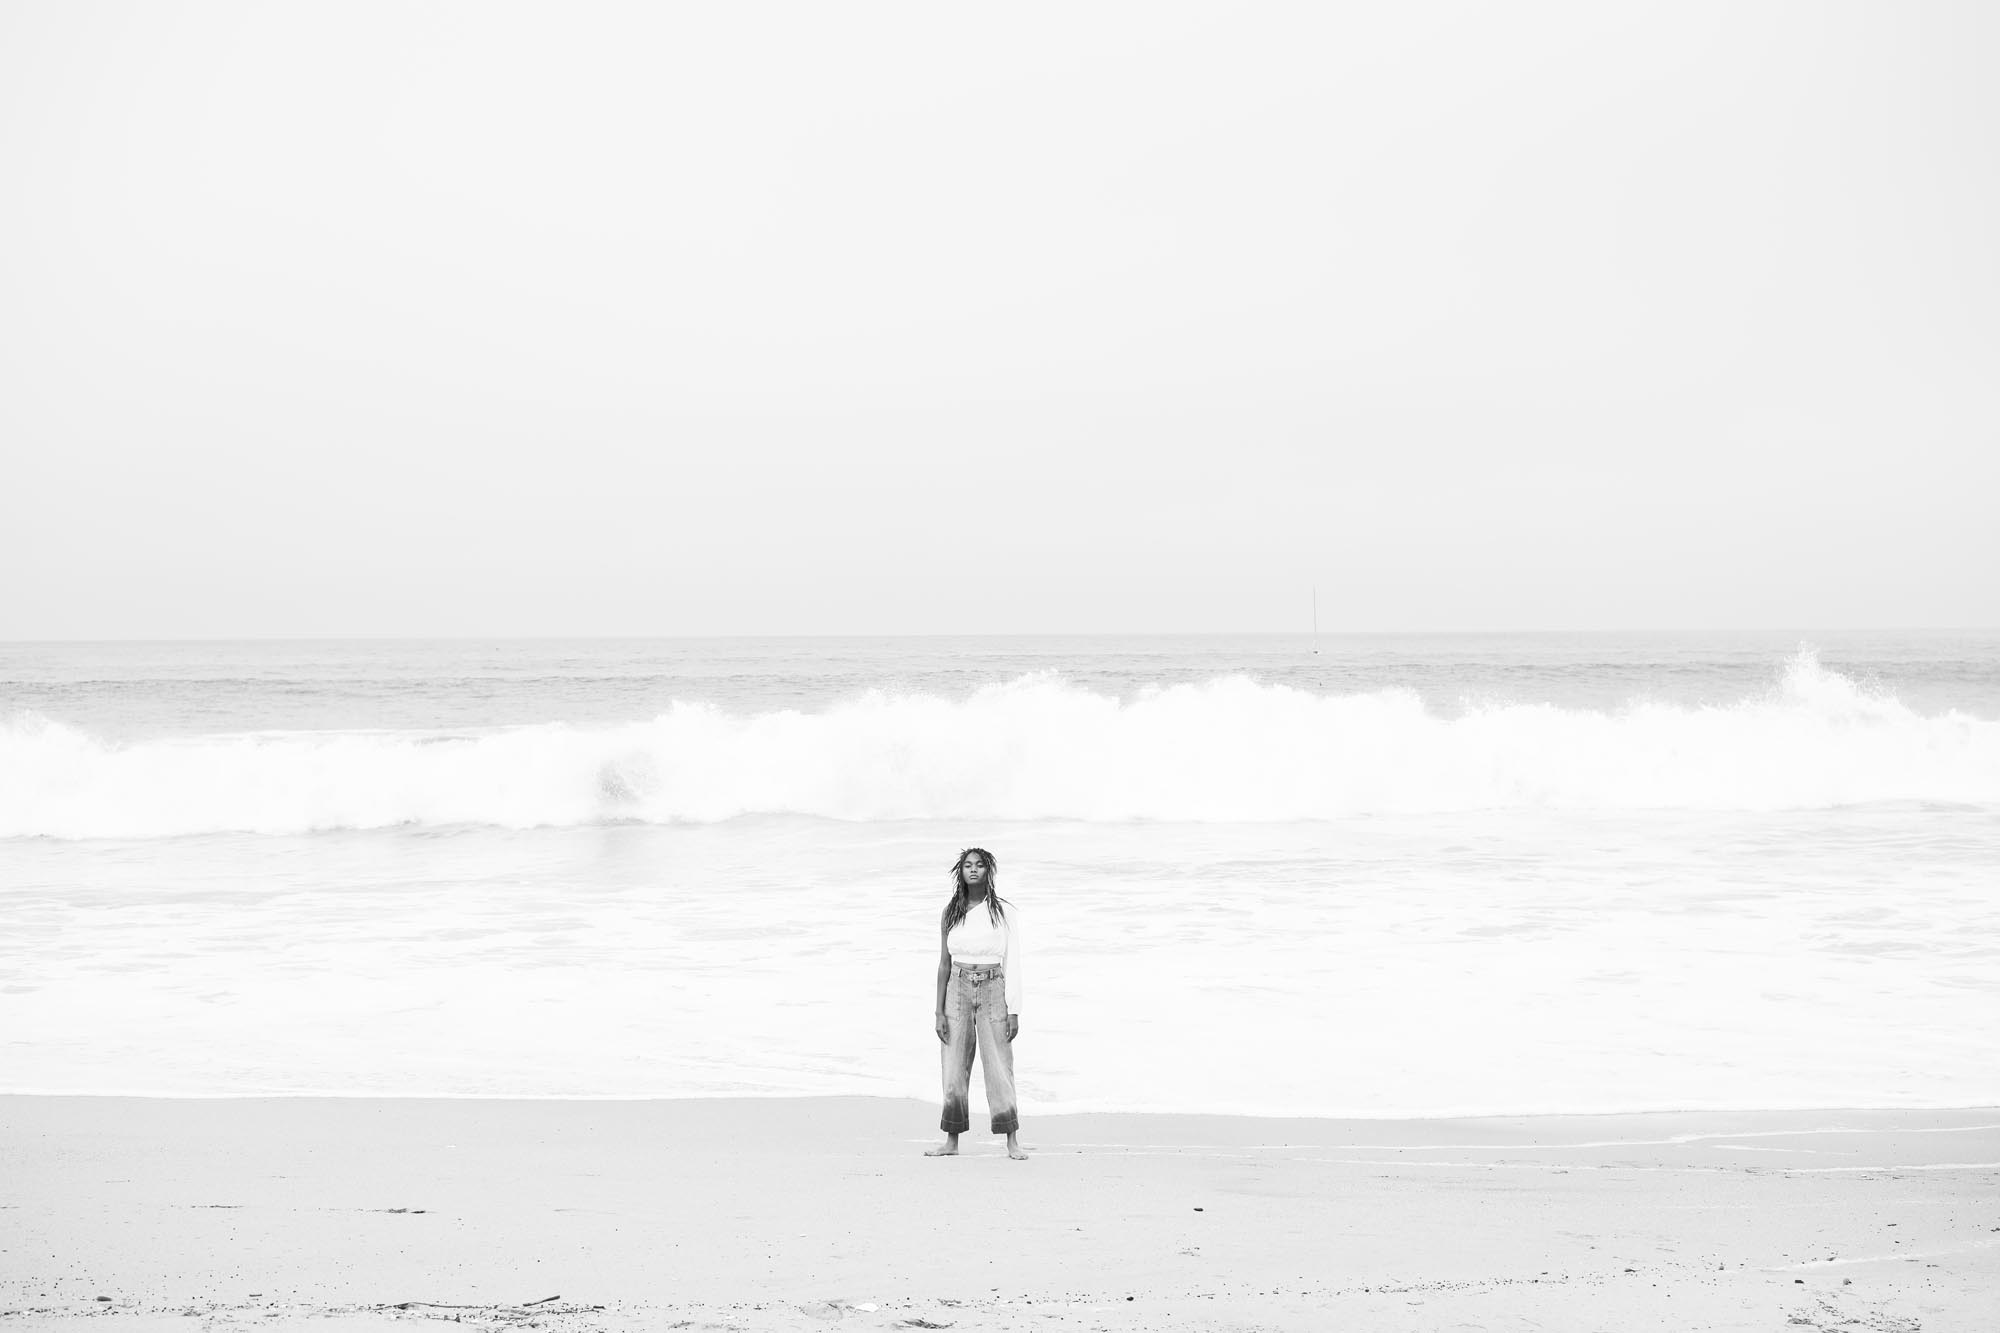 A young black woman stands framed against a tumultuous wave formation